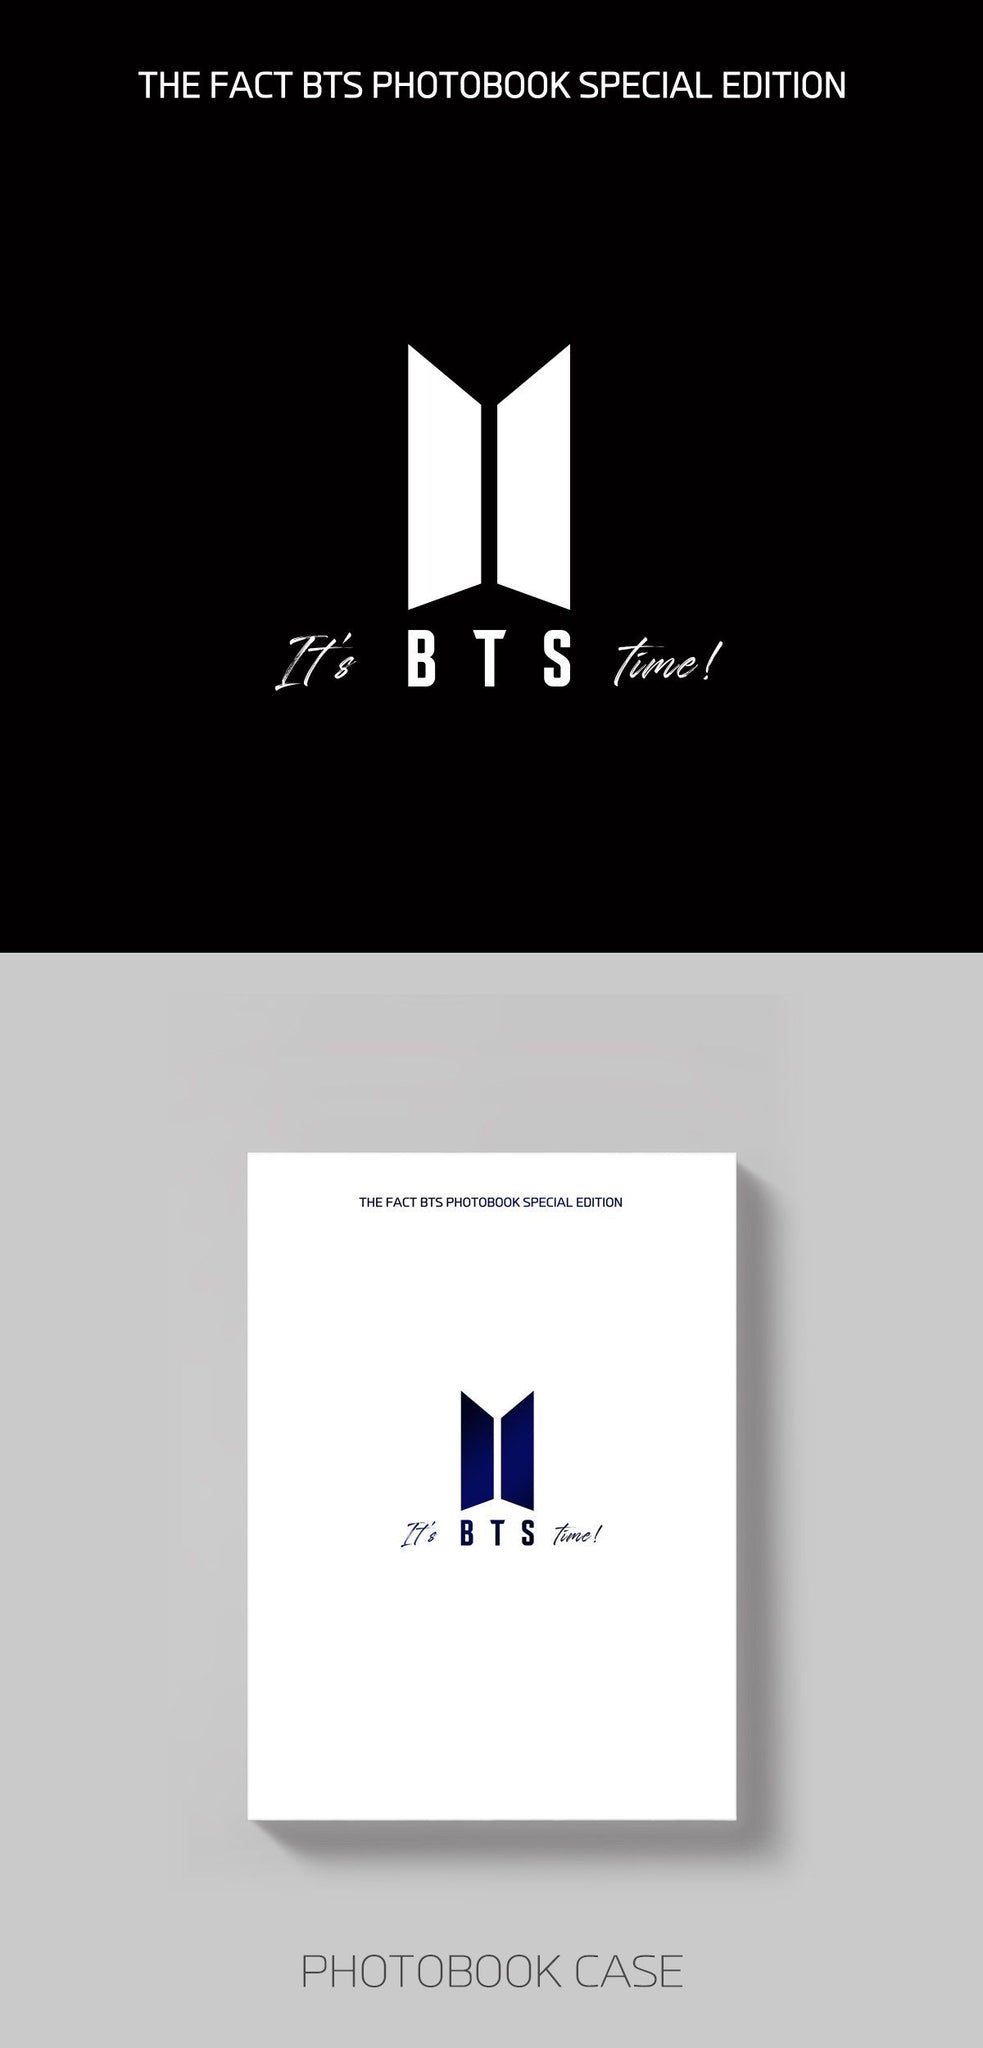 BTS the Fact Photobook (Special Limited Edition) – Kpop Planet